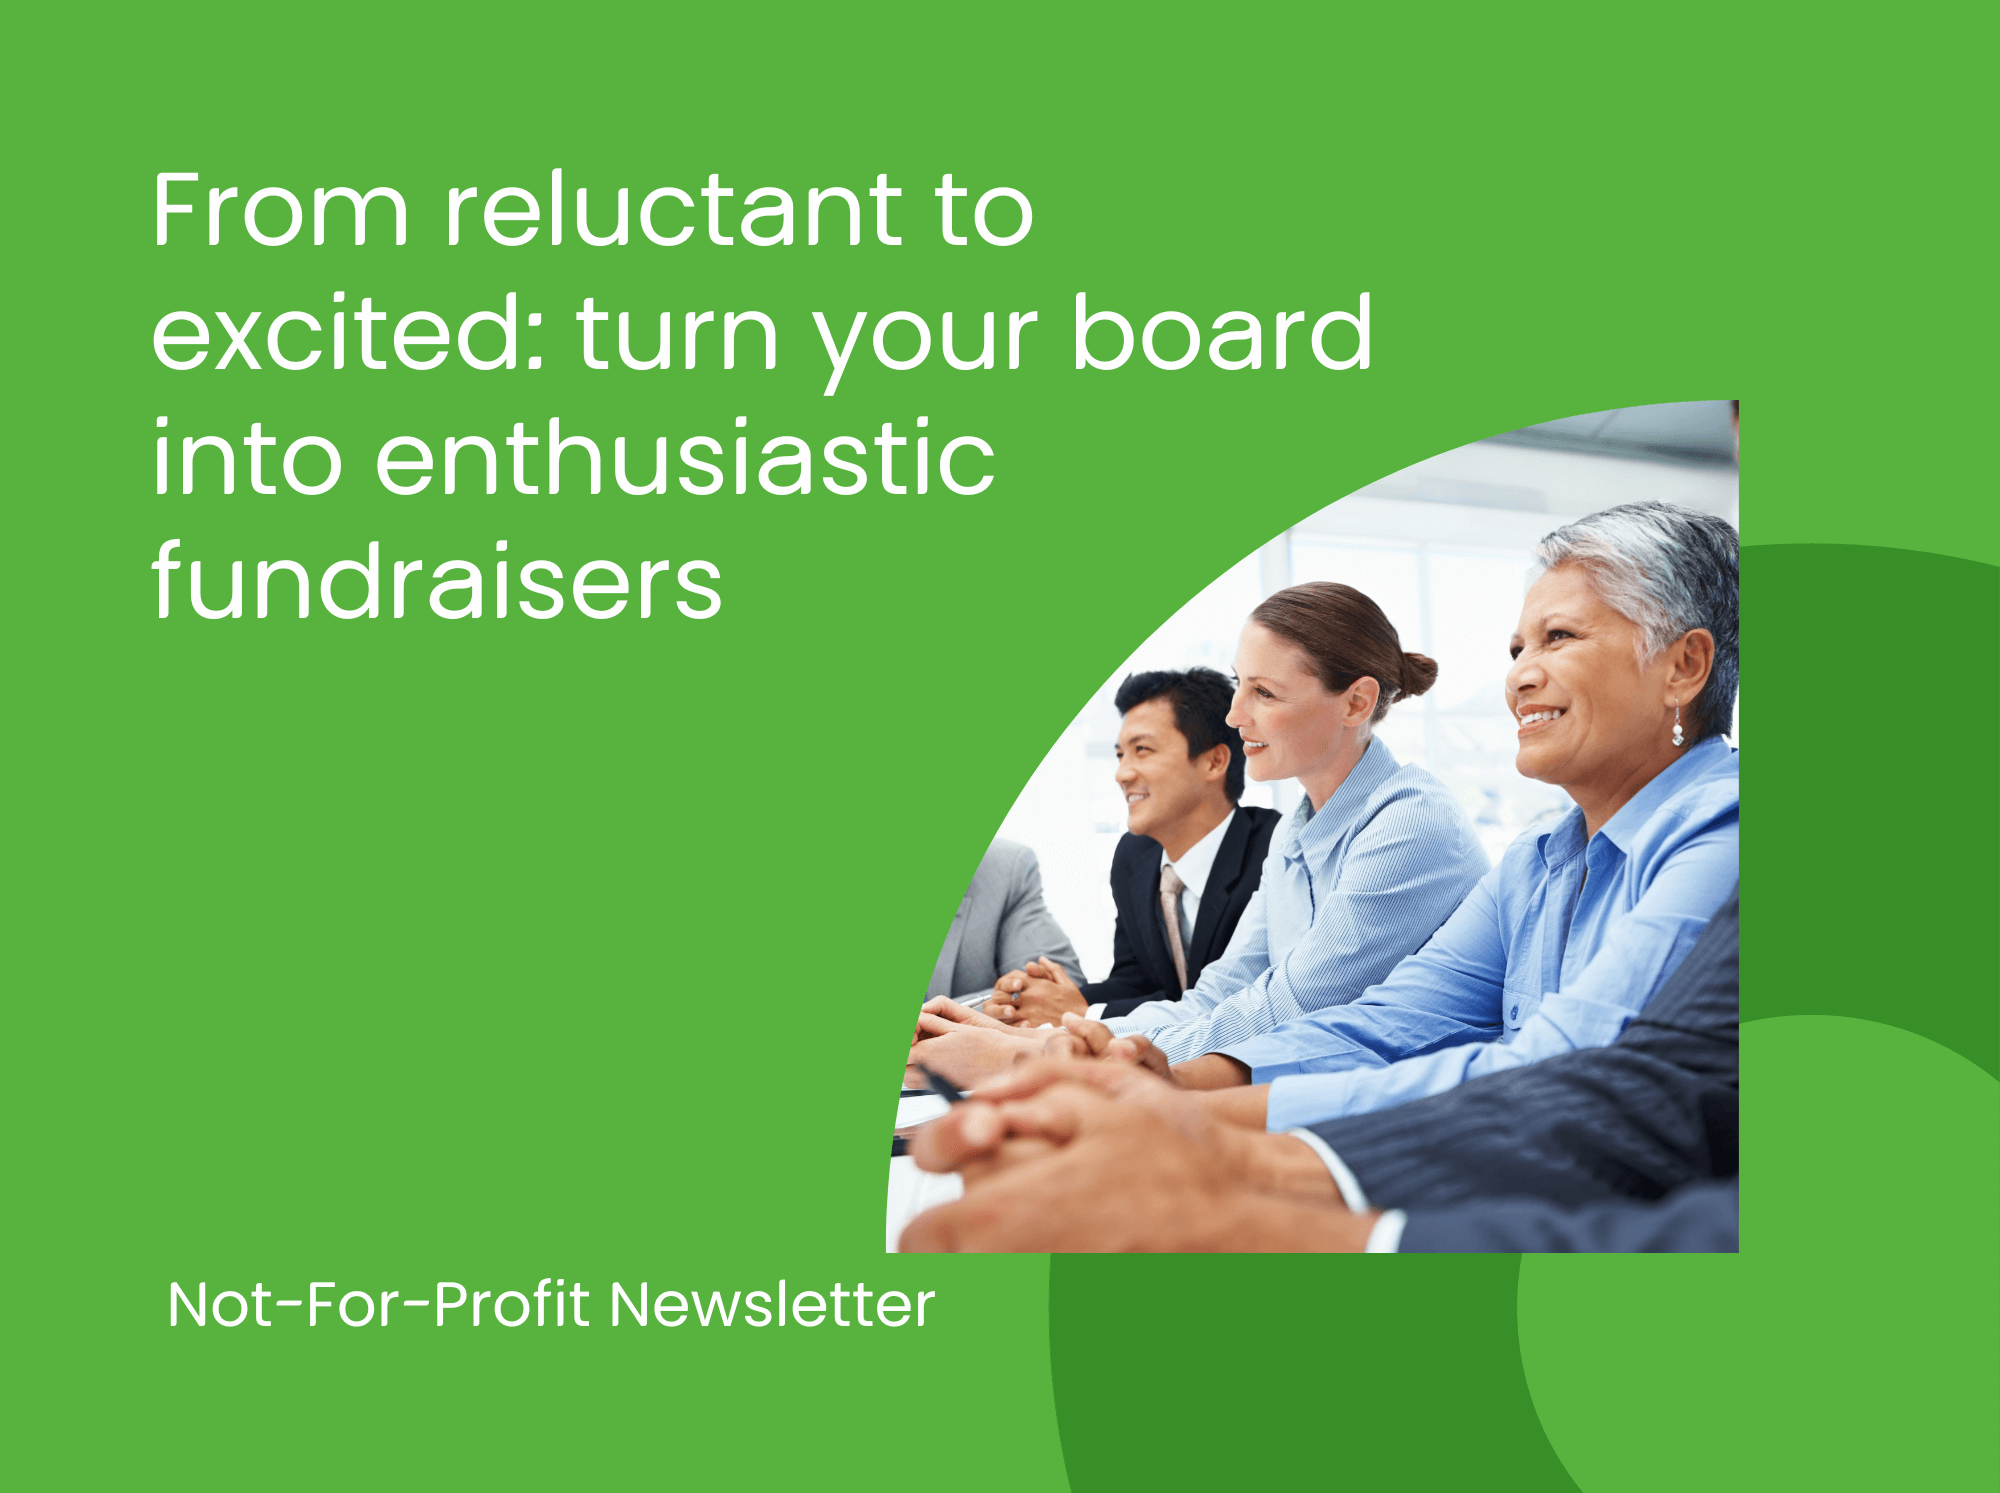 From reluctant to excited: turn your board into enthusiastic fundraisers